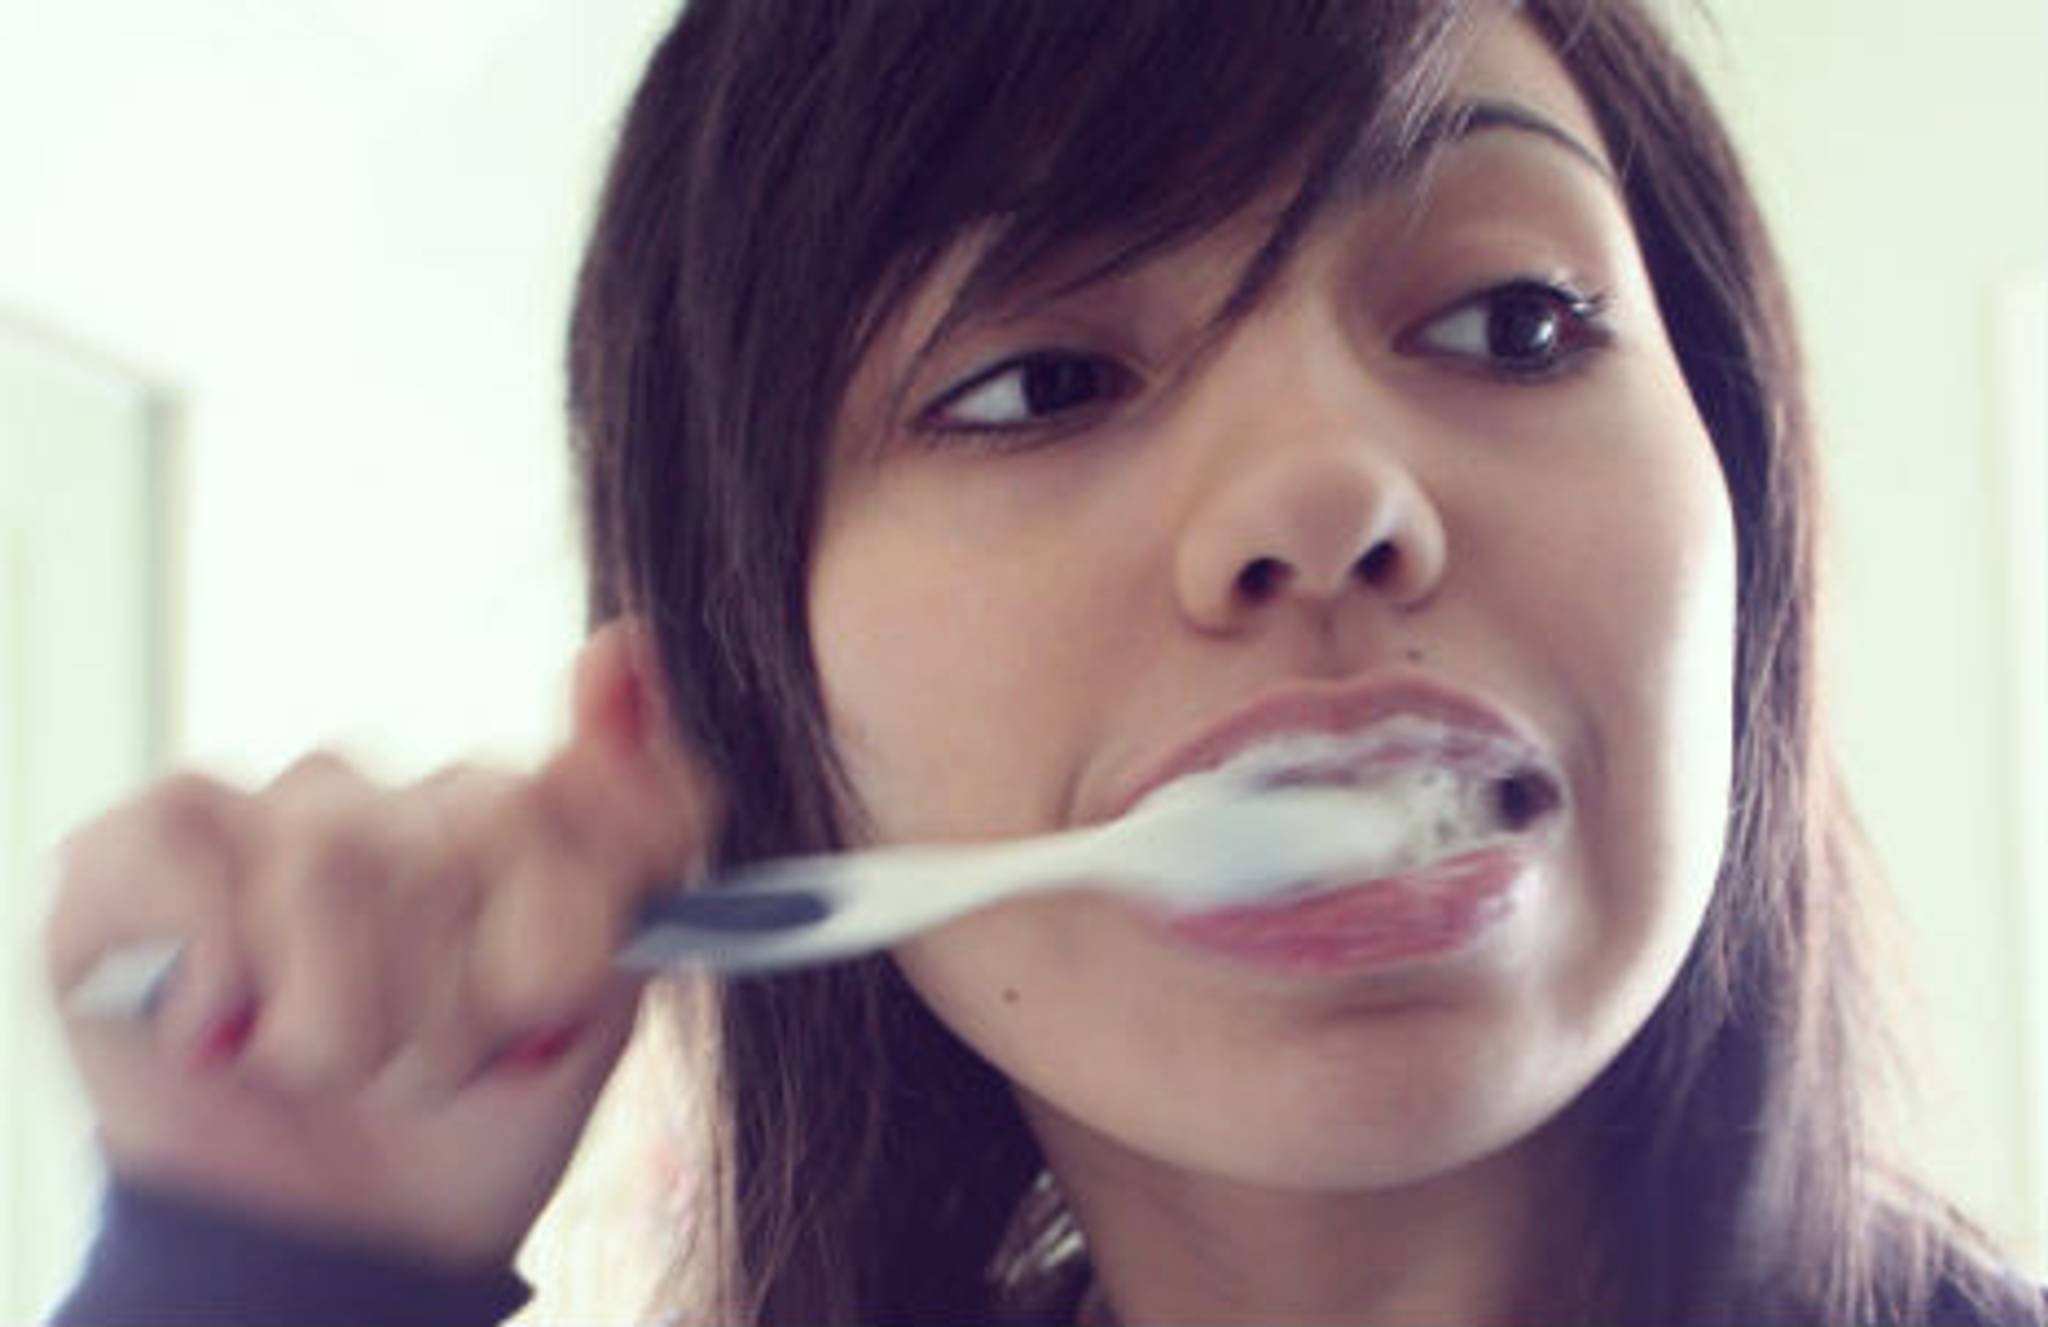 Get an energy boost as you brush your teeth